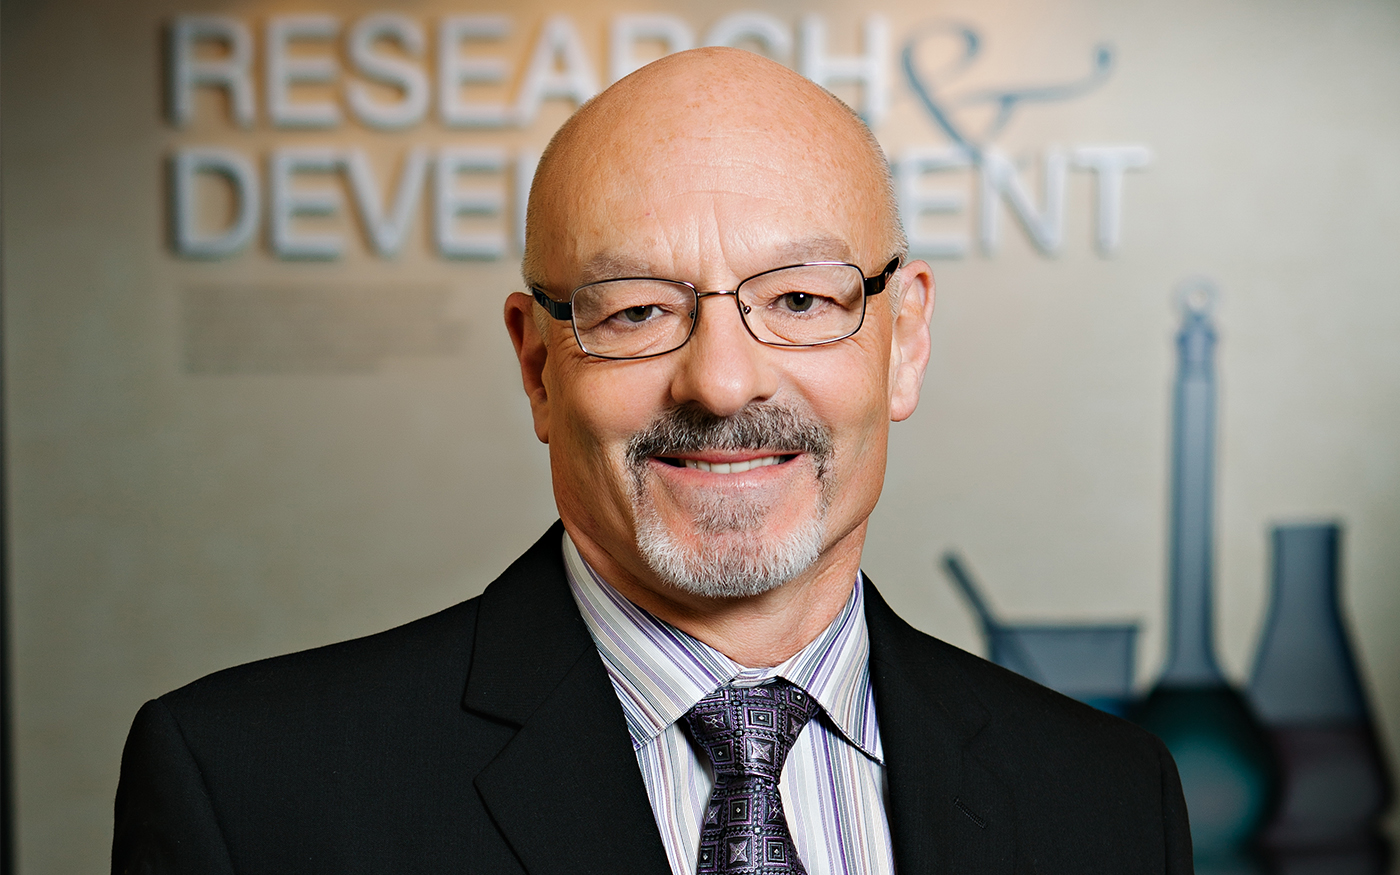 A portrait of Dr. Keith Randolph in Amway's Research and Development department.